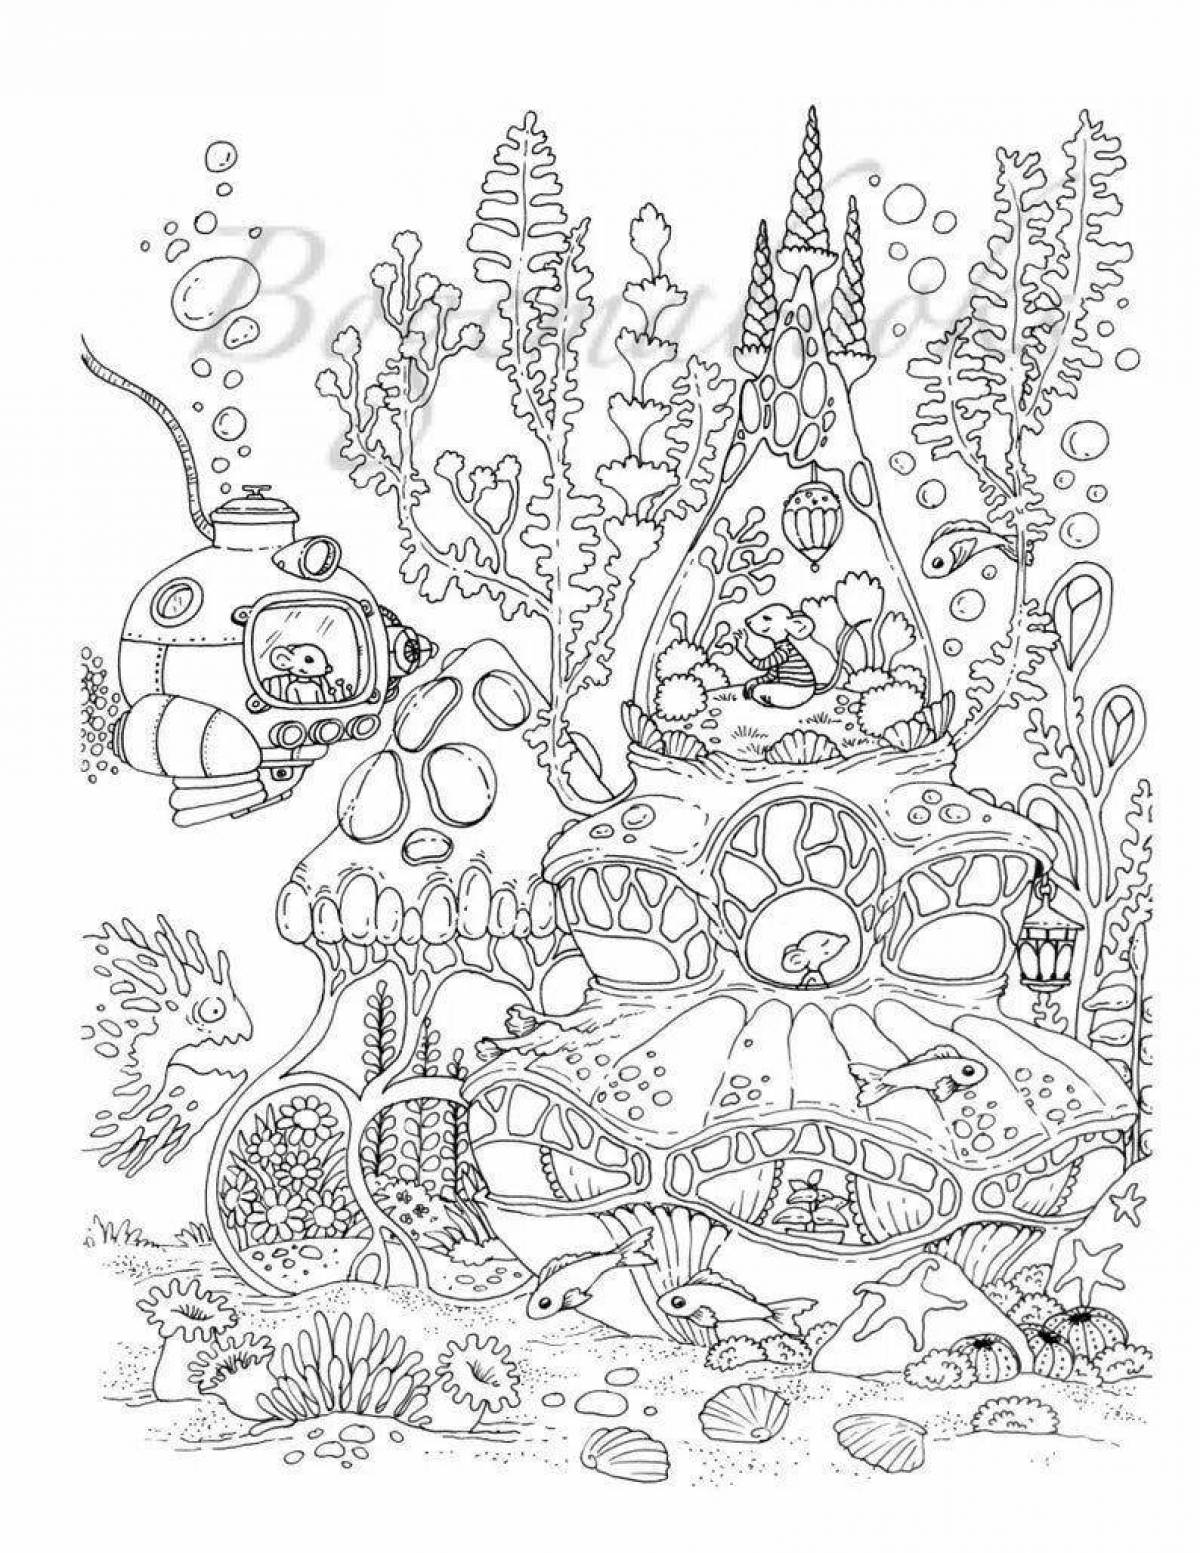 Coloring page cheerful town